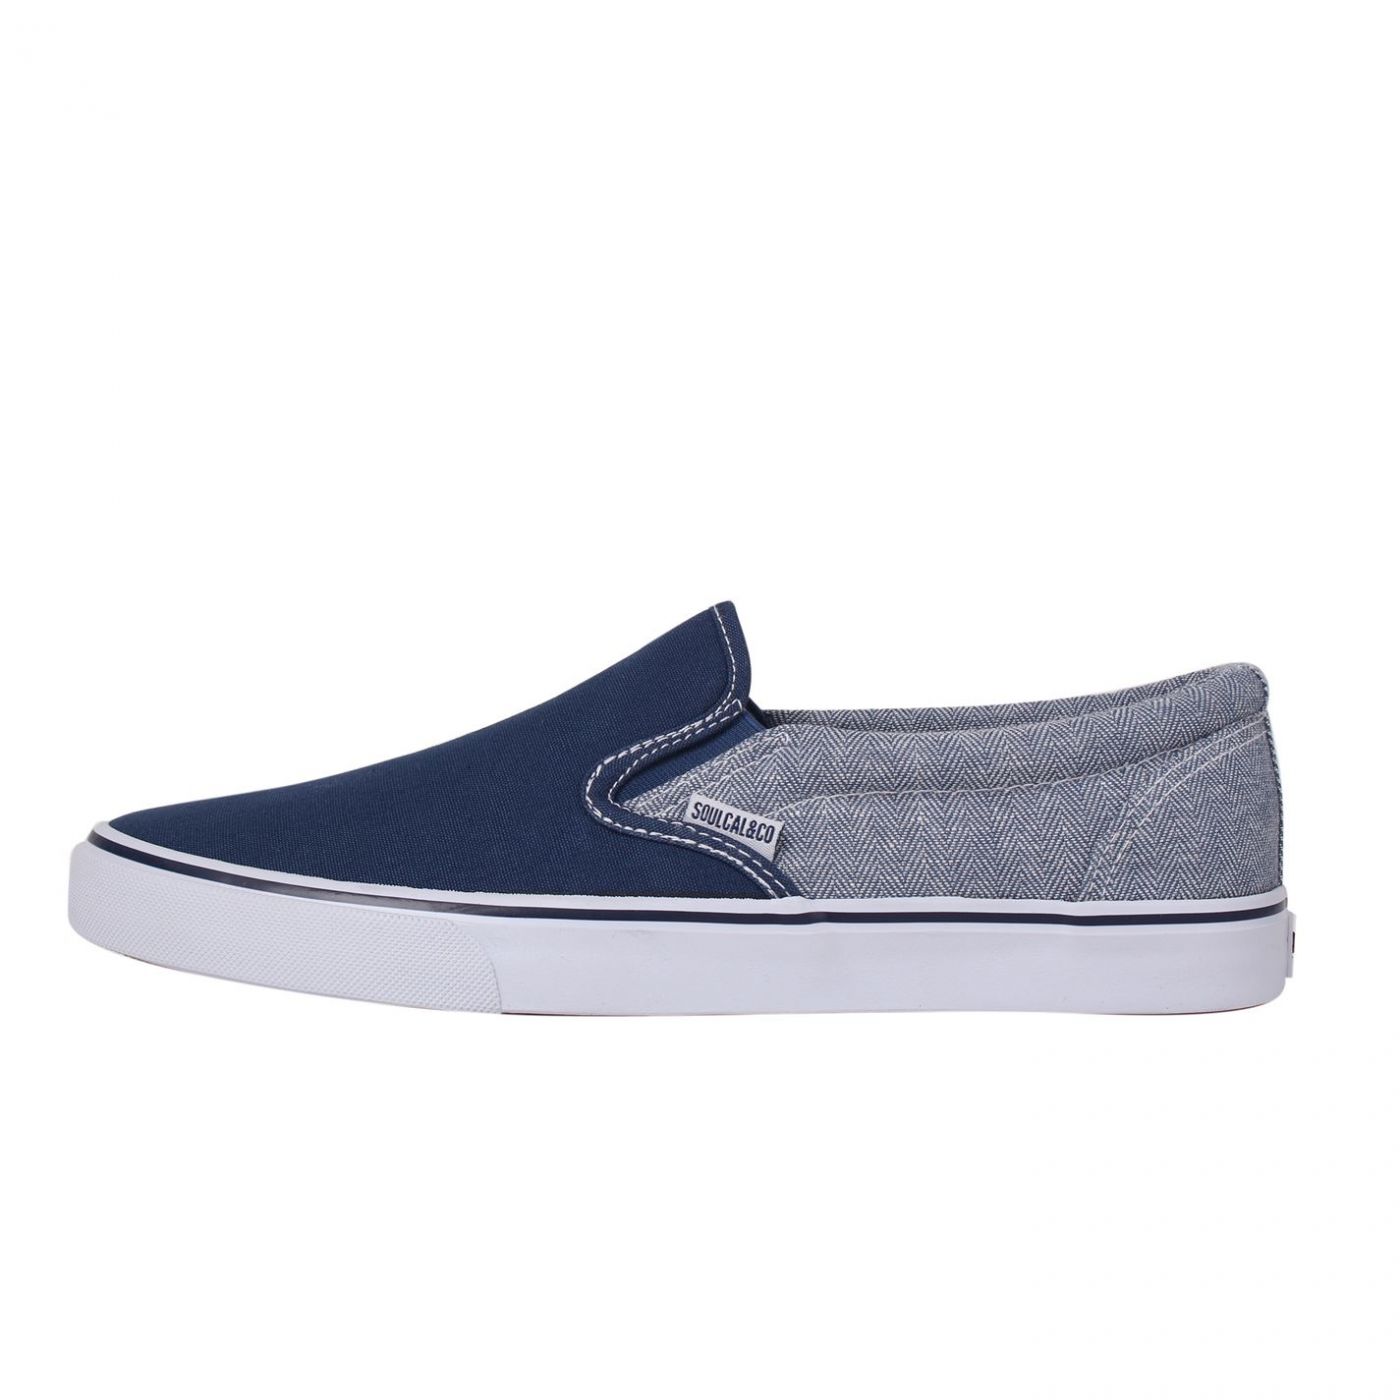 soulcal slip on shoes